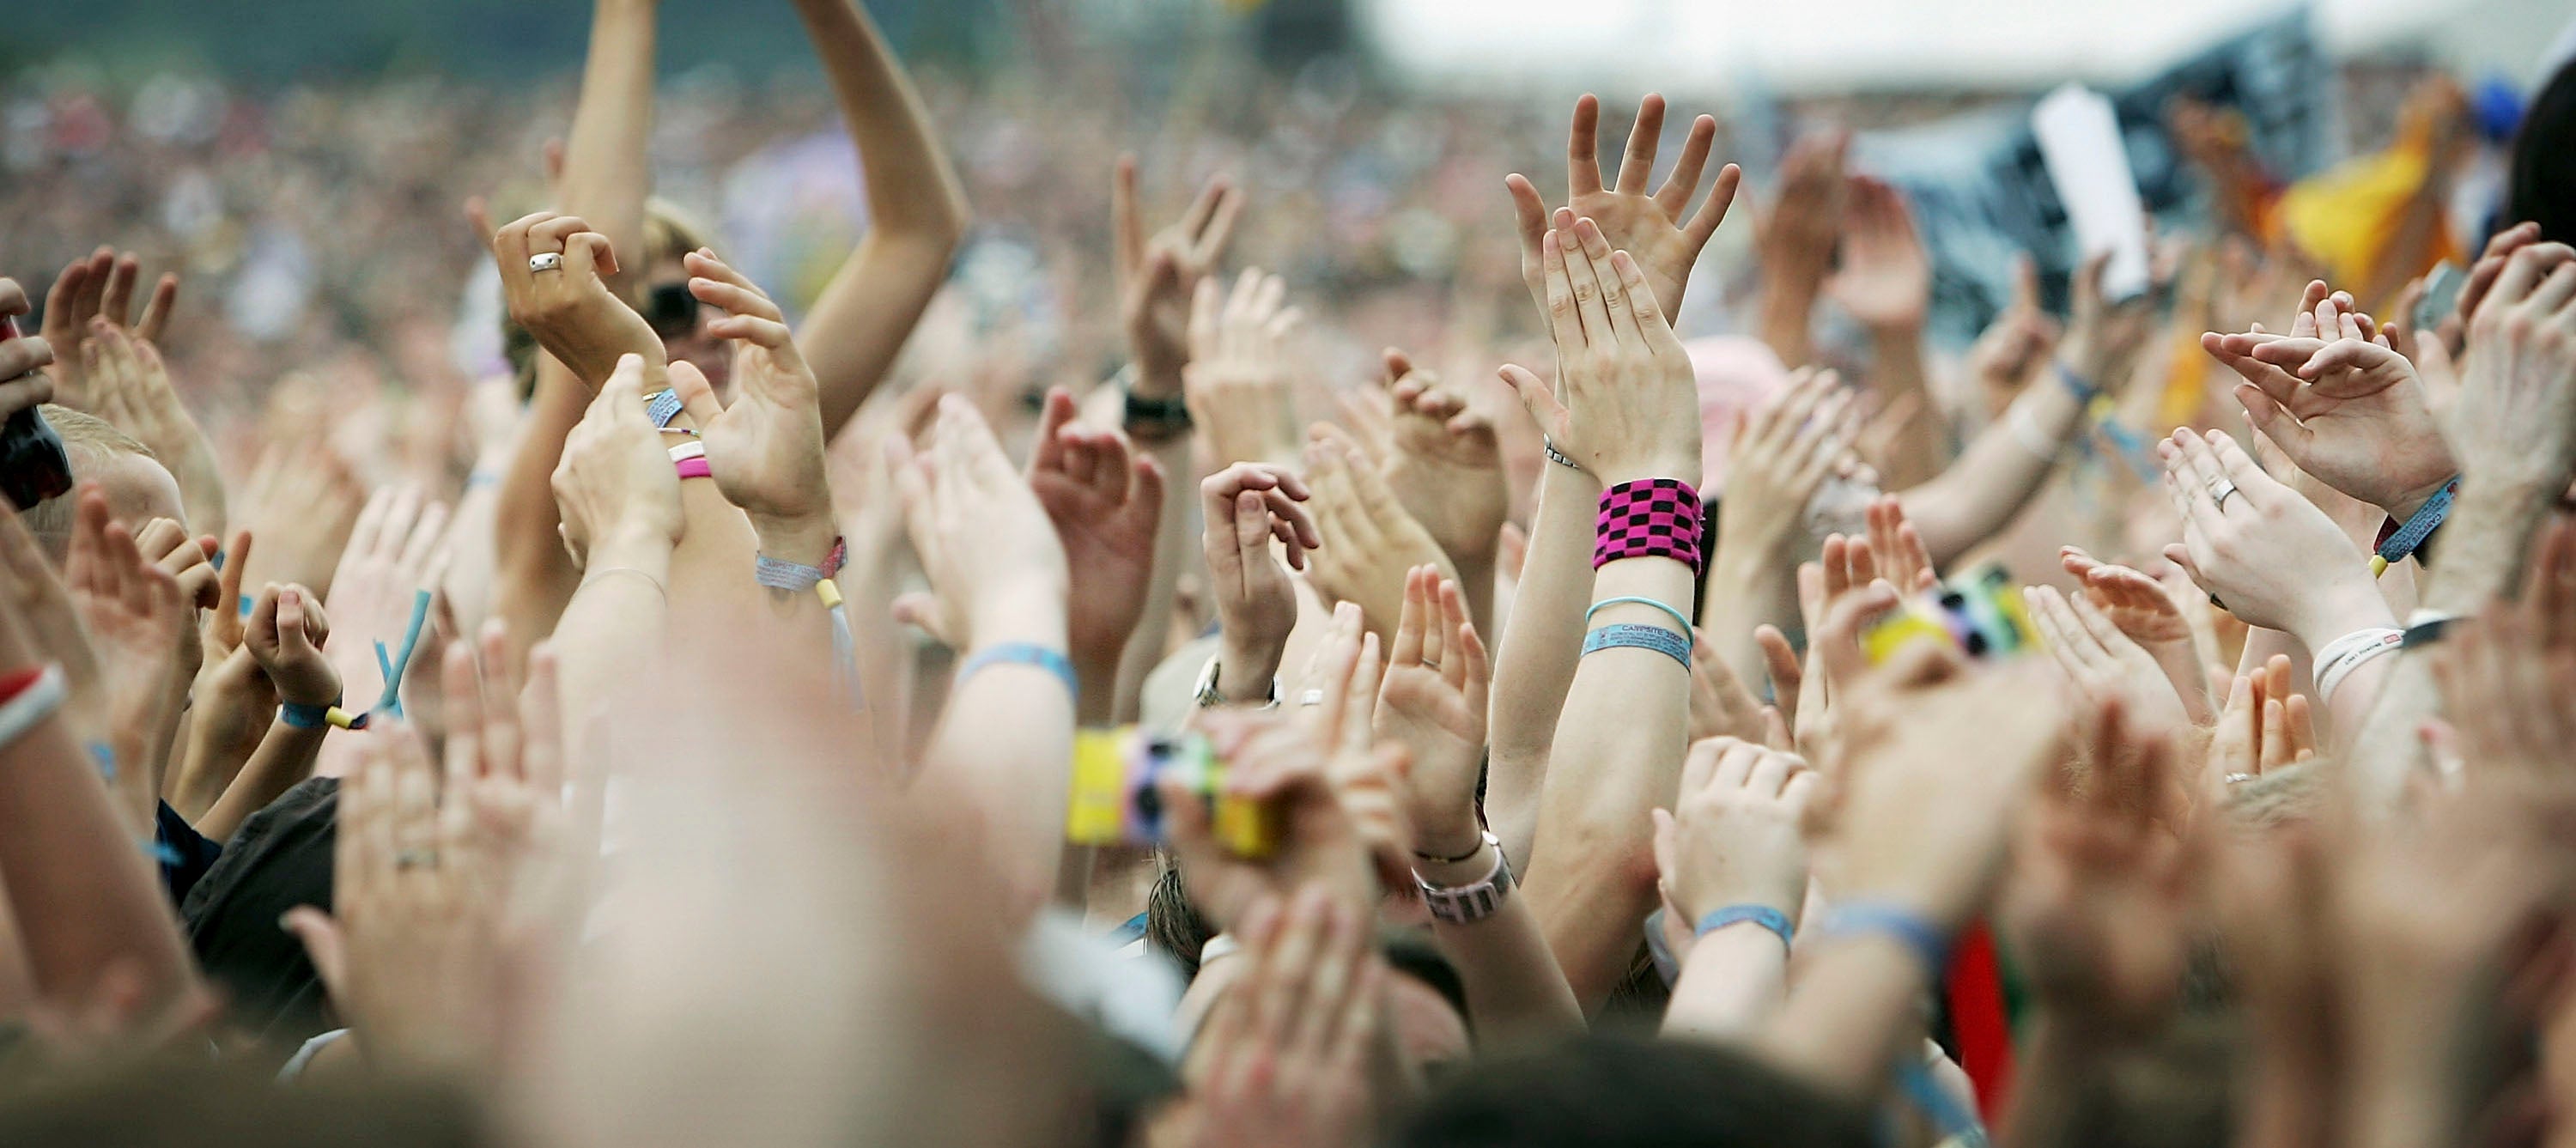 The live events sector is worth more than £70 billion annually to the UK economy